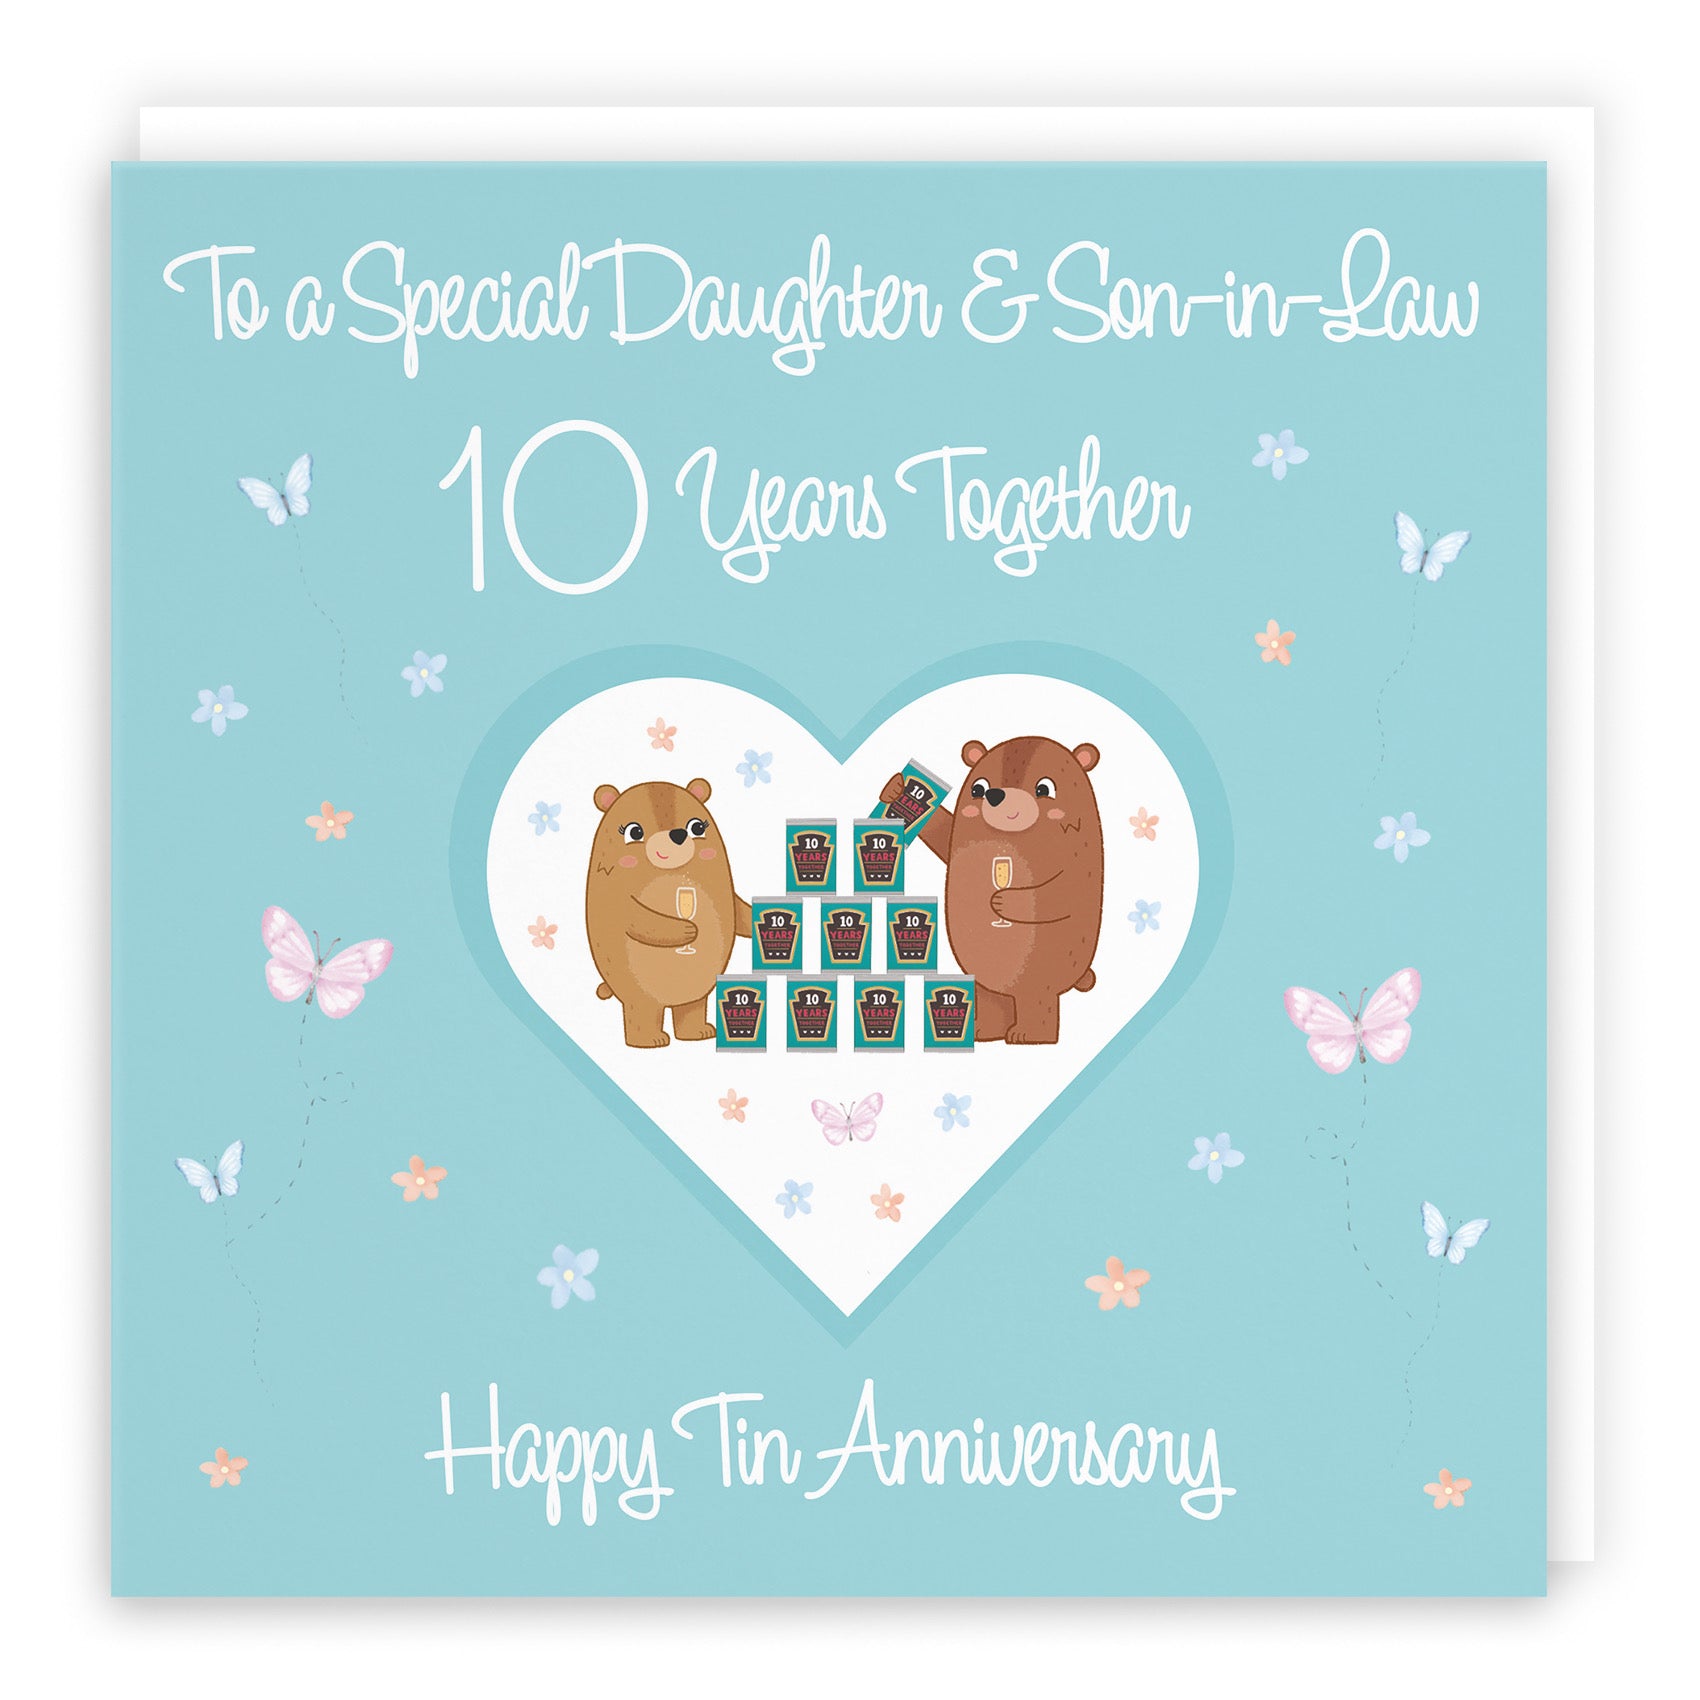 Large Daughter & Son-in-Law 10th Anniversary Card Romantic Meadows - Default Title (B0CXY46FKK)